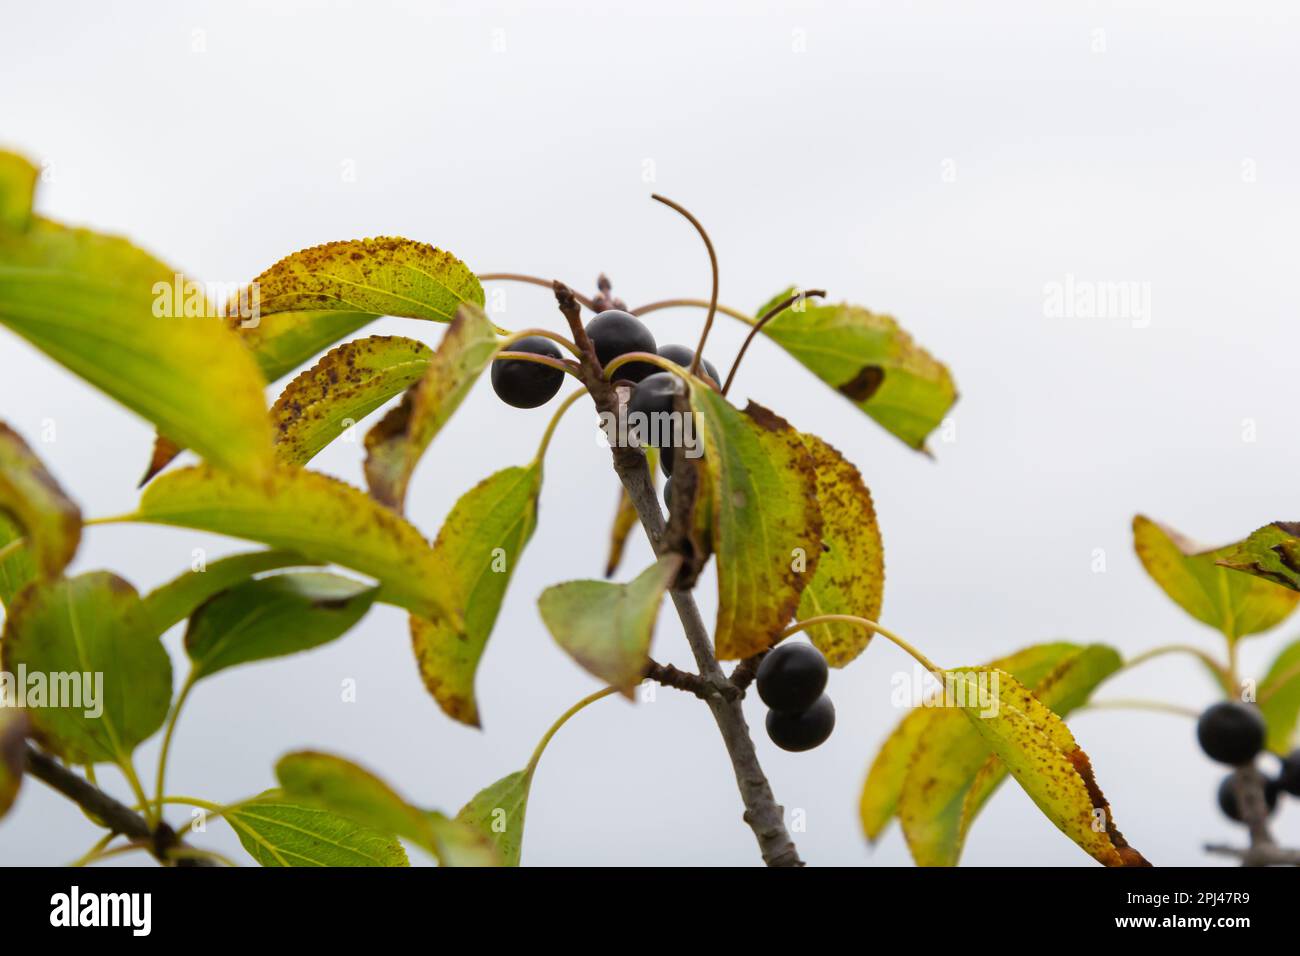 Branch of Common buckthorn Rhamnus cathartica tree in autumn. Beautiful bright view of black berries and green leaves close-up. Stock Photo